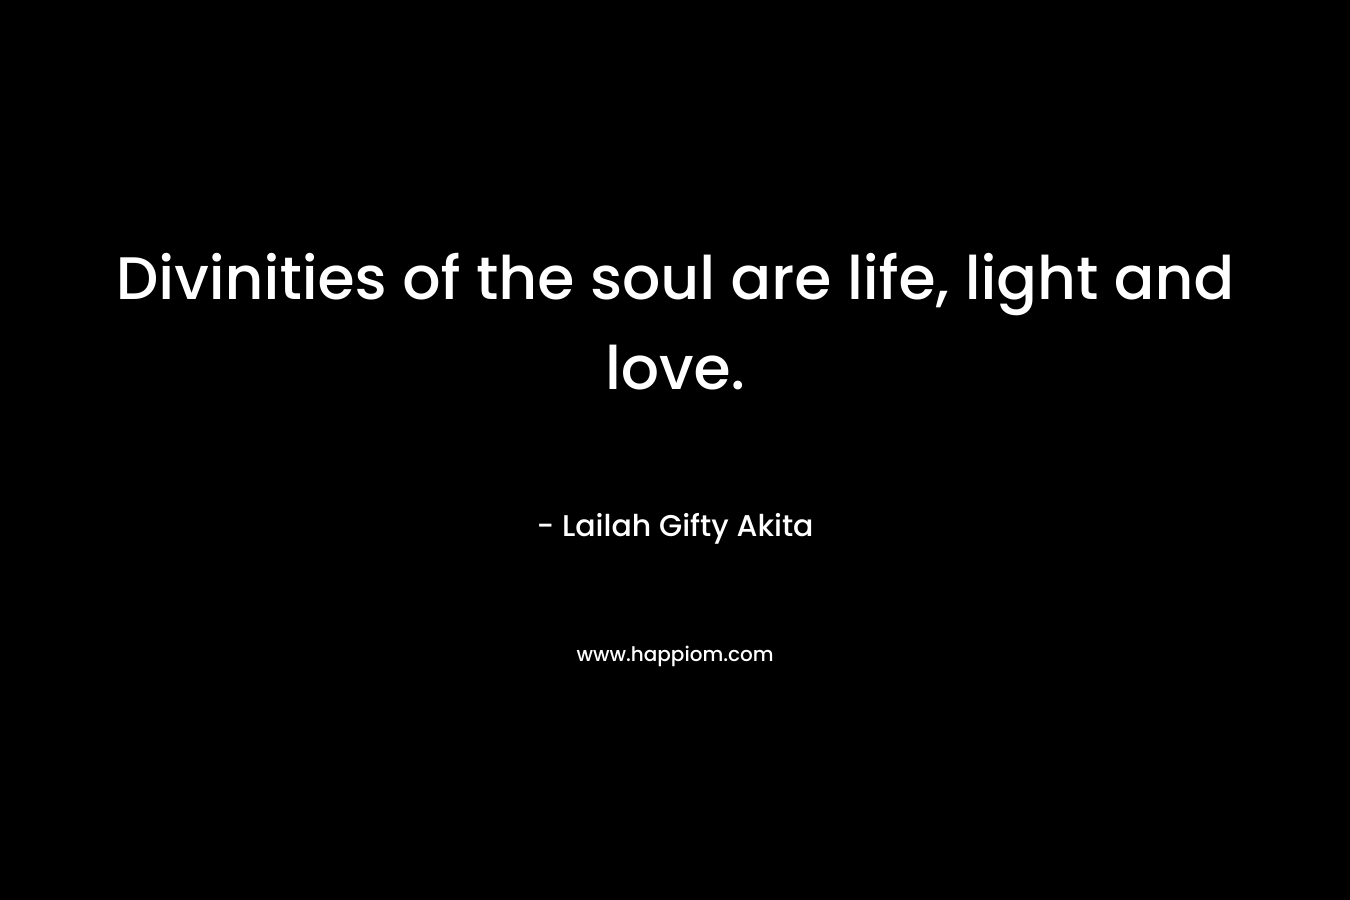 Divinities of the soul are life, light and love.